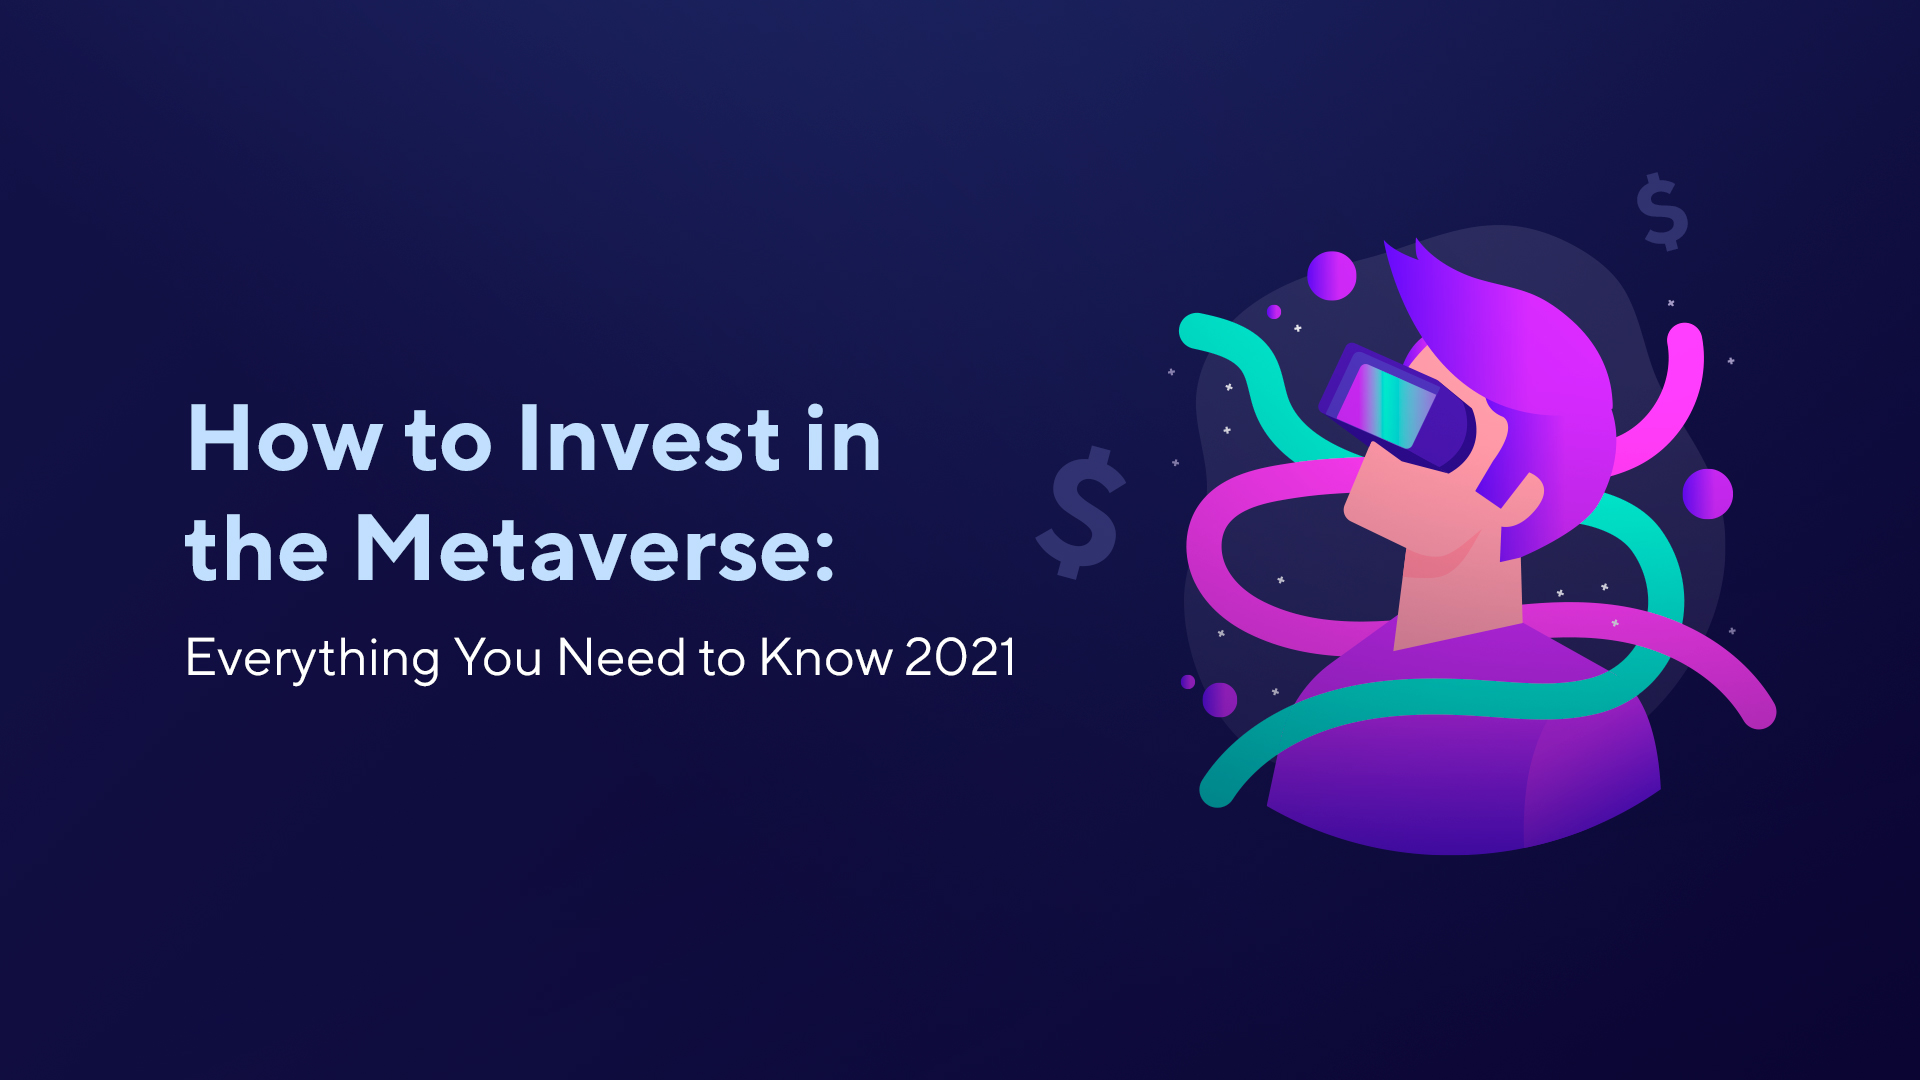 How to Invest in the Metaverse: Everything You Need to Know 2022